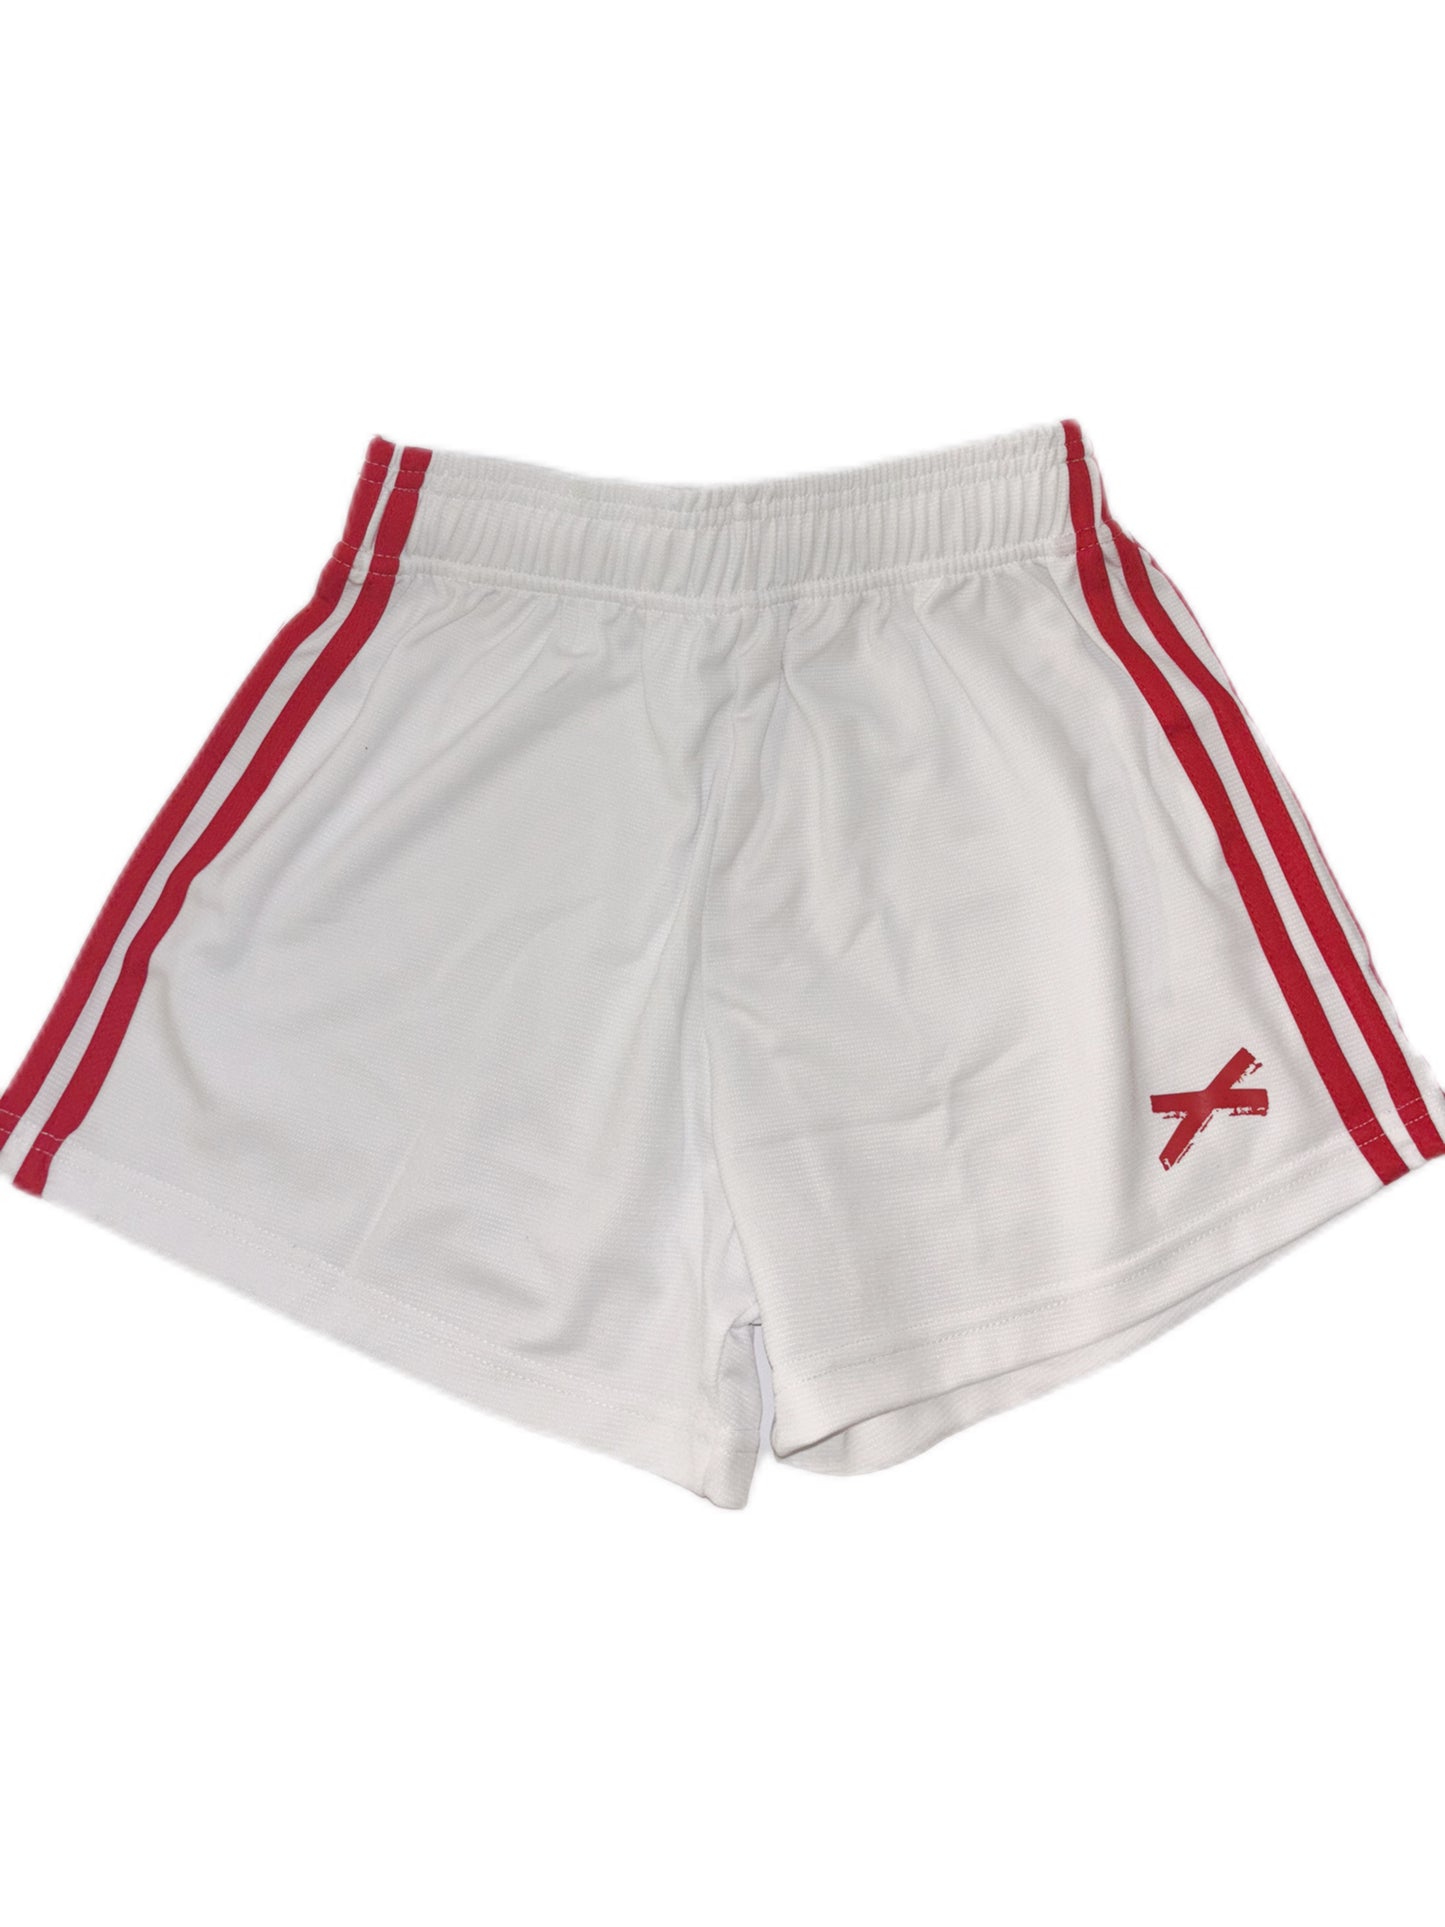 New and Improved GAA Shorts